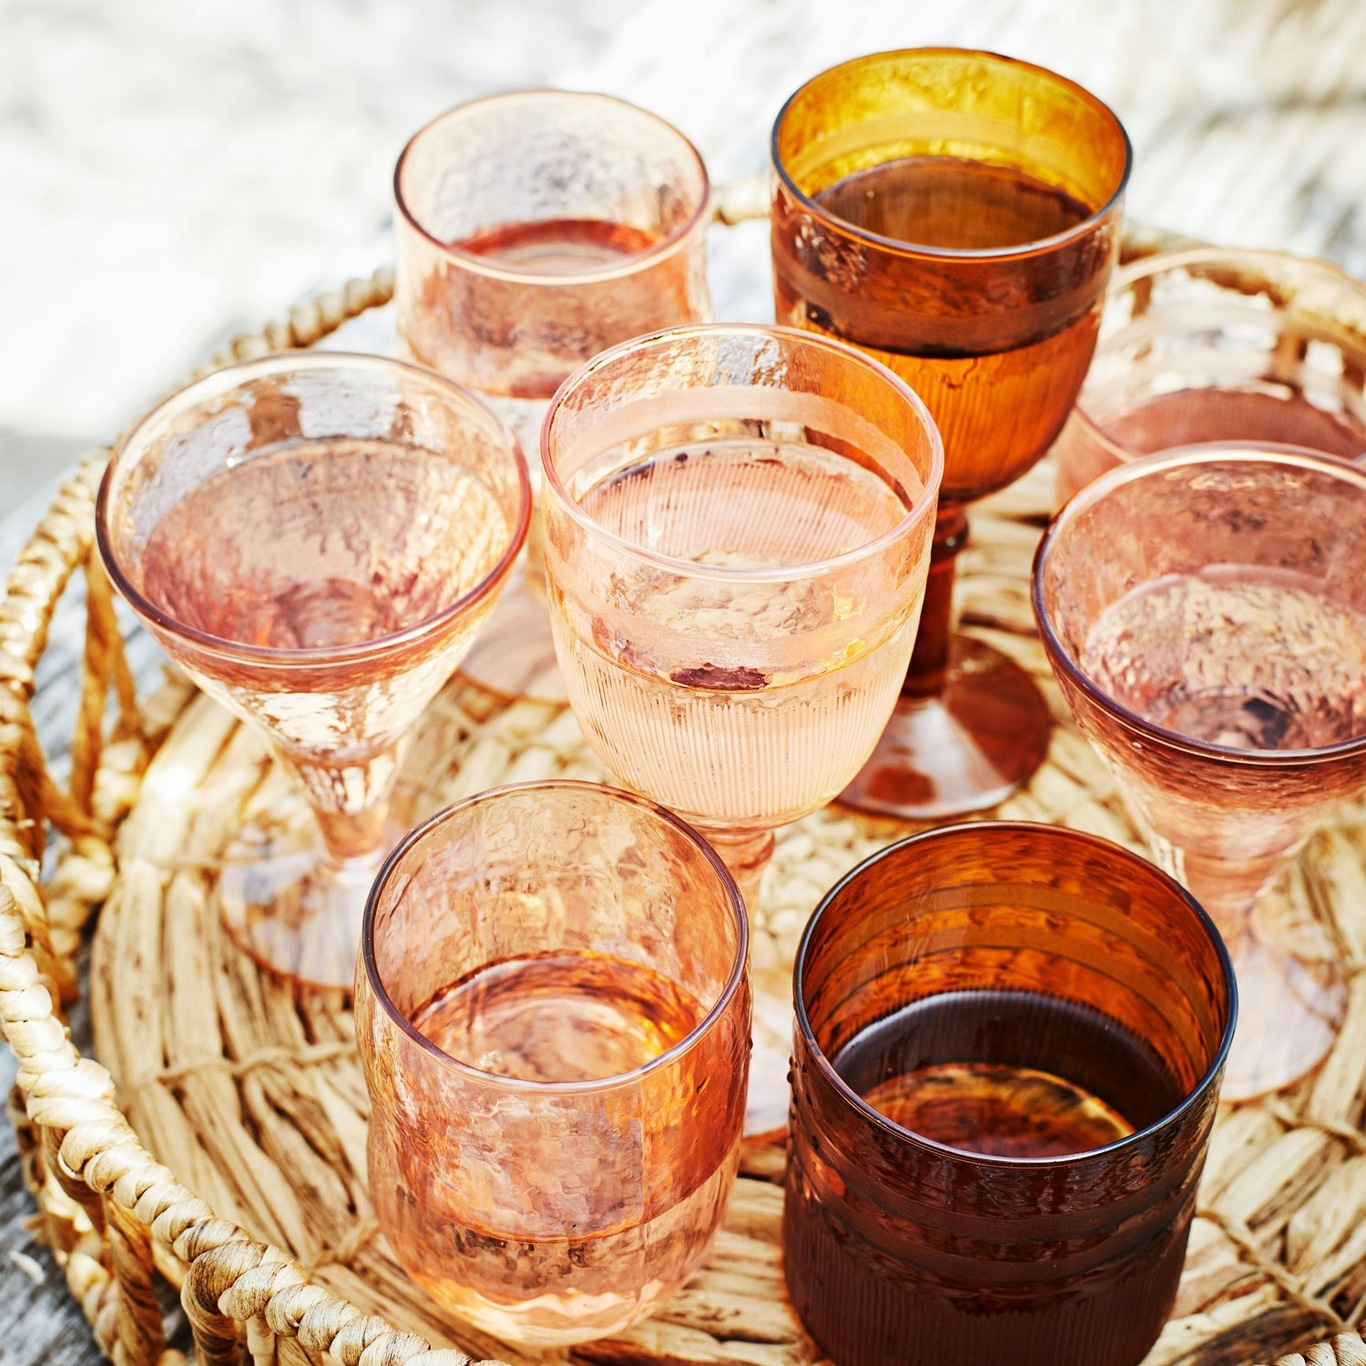 Hammered Outdoor Stemless Wine Glasses